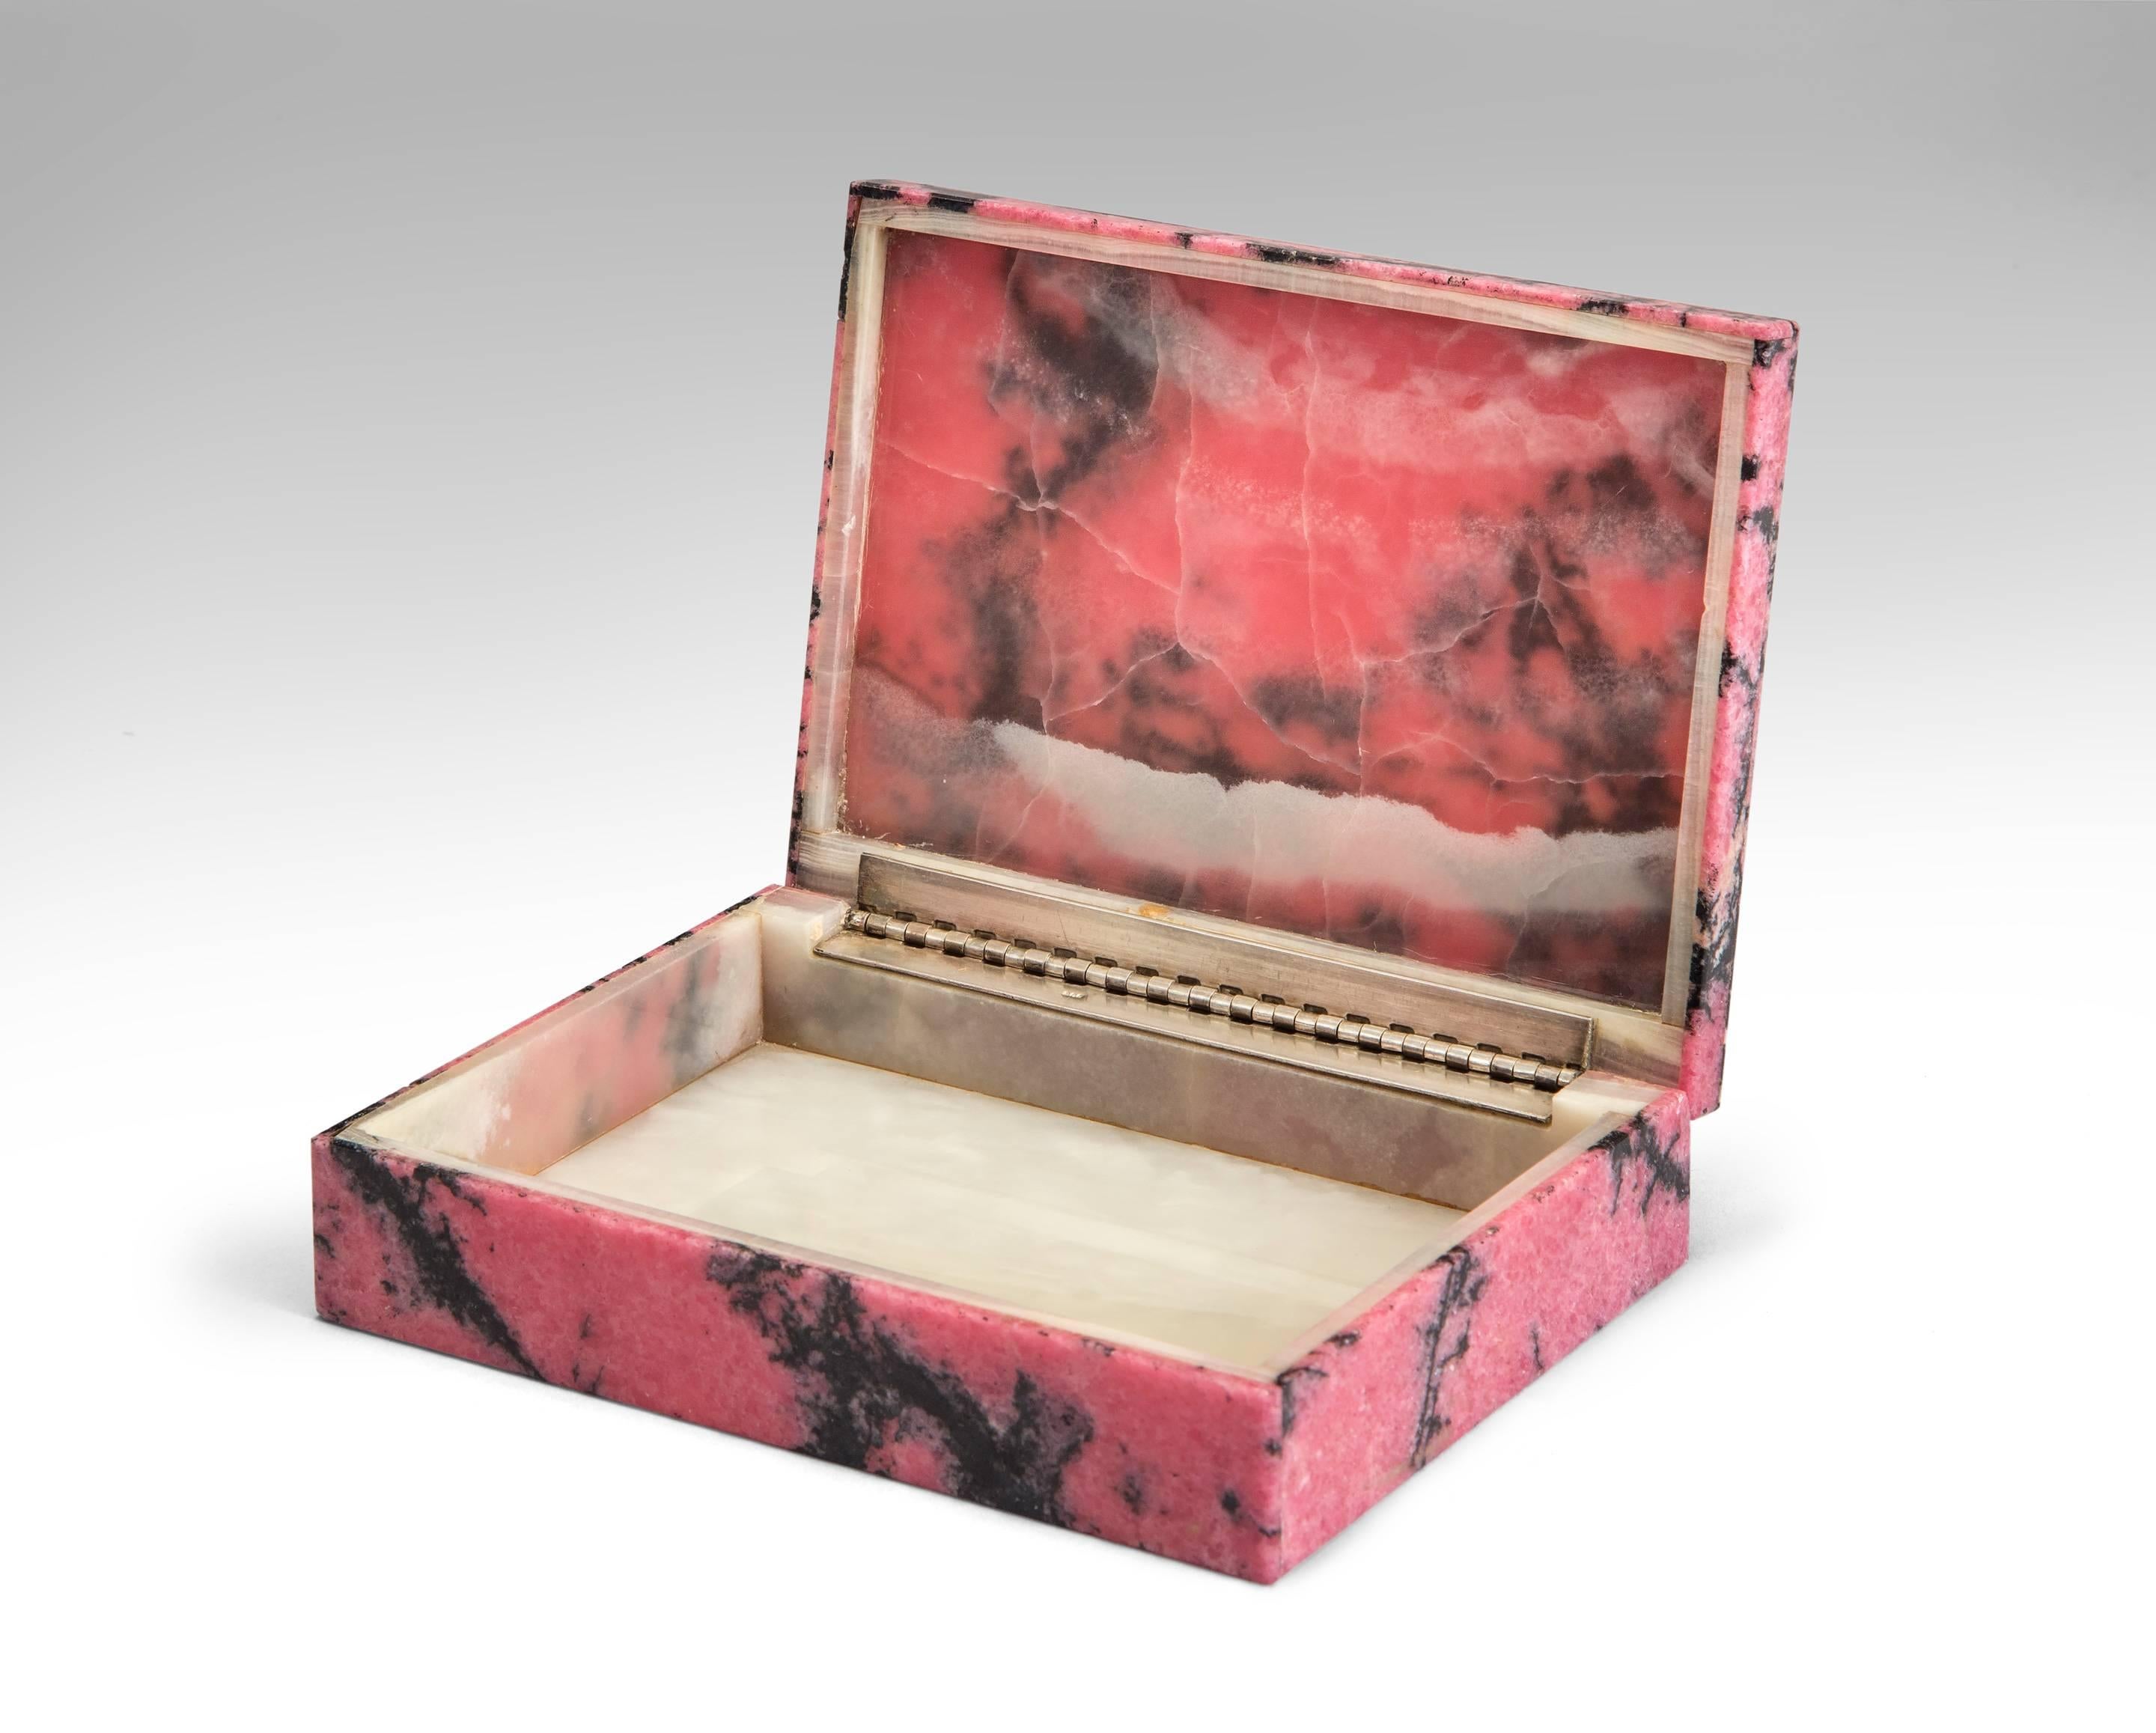 Rhodonite, onyx and silver box
20th century.
A semiprecious favourite stone of the Russian Czars, this rhodonite box is not only crafted with exceptional skill but is composed of the most desired dark colored rhodonite. The rectangular box of dark